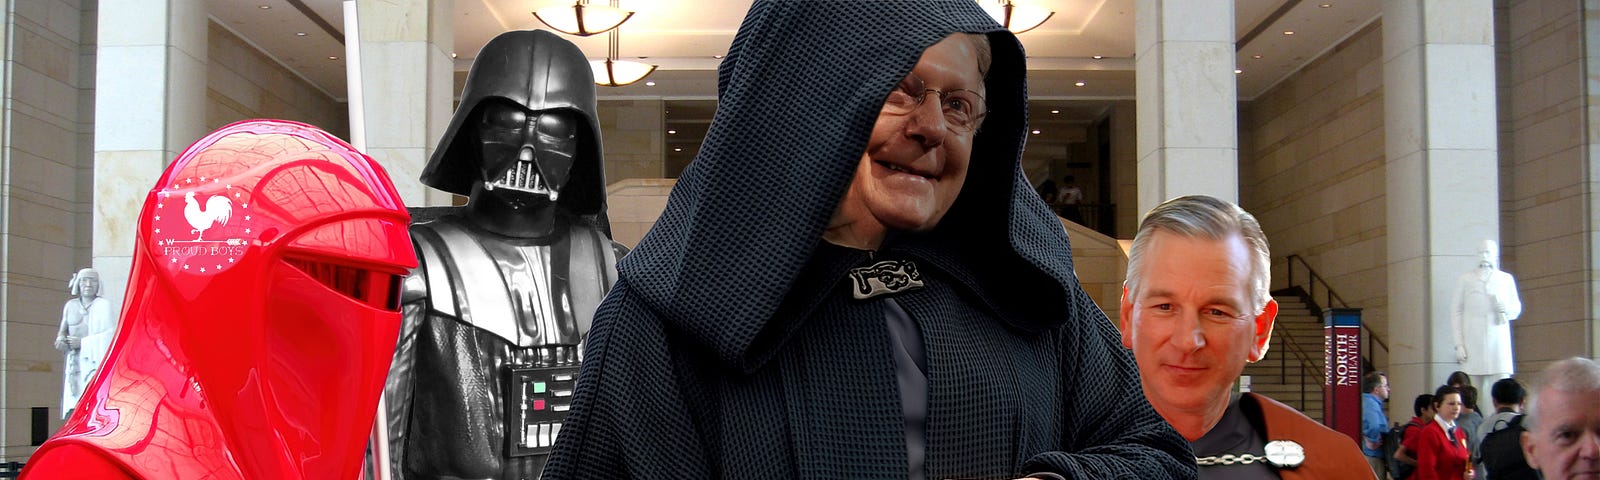 Mitch McConnell and Tommy Tuberville as Sith Lords